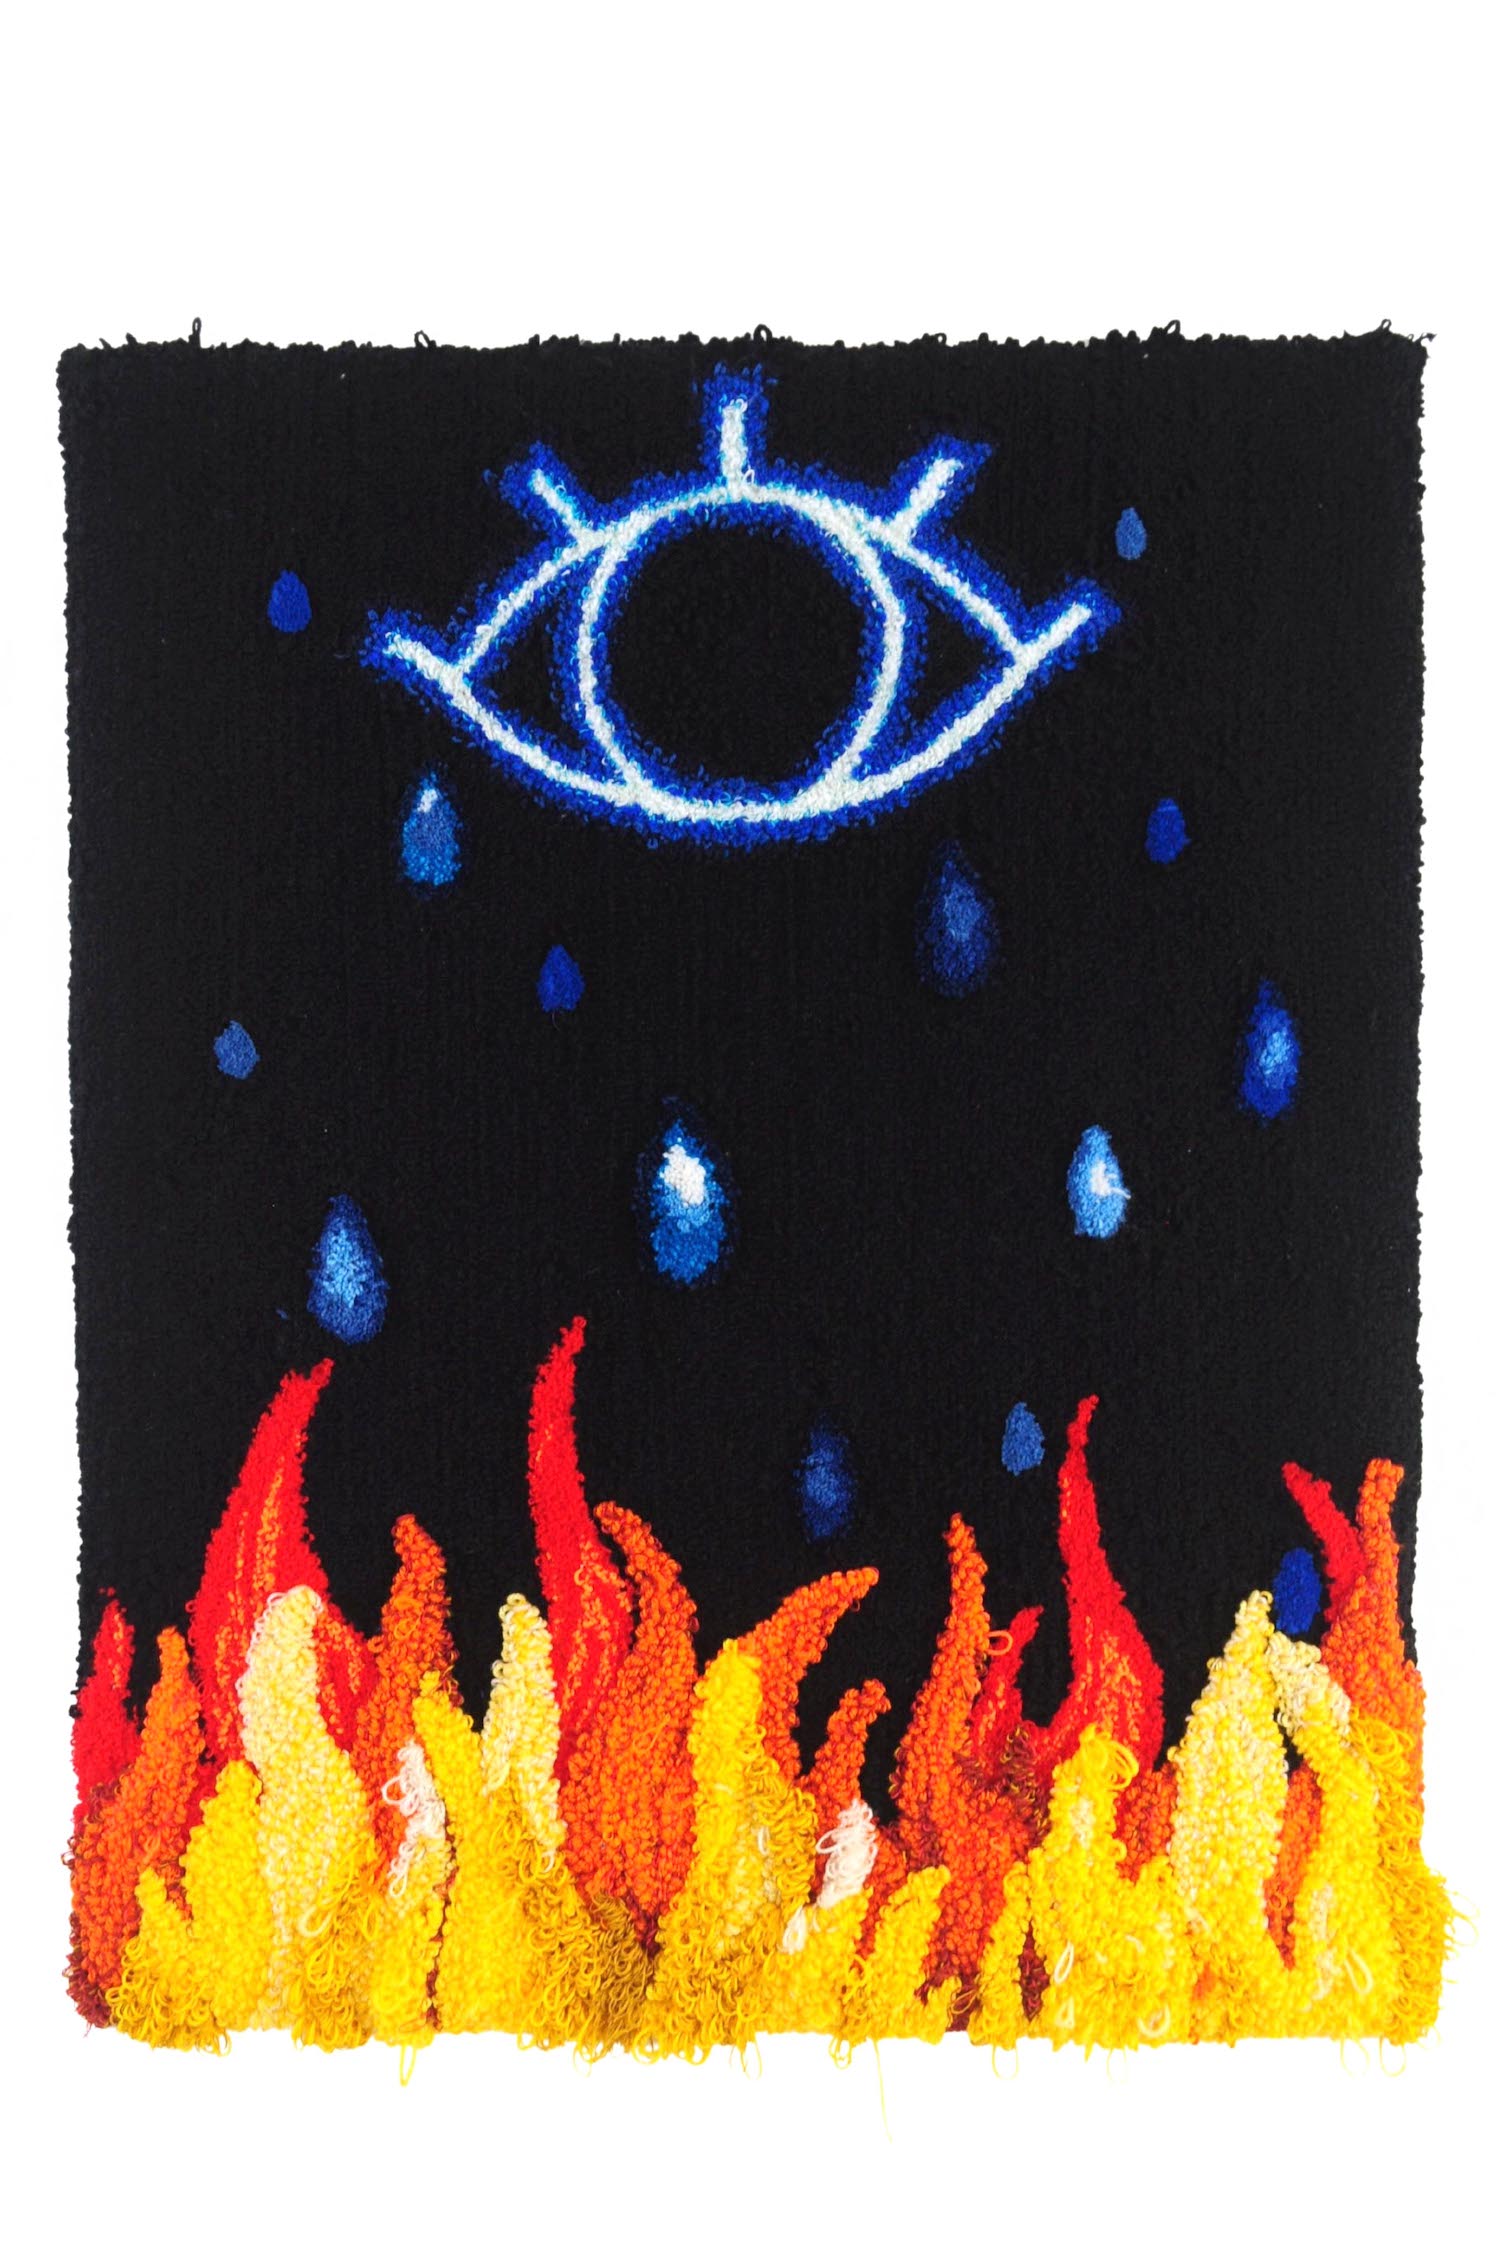 Yellow and red flames beneath the outline of an eye in blue against a black backdrop